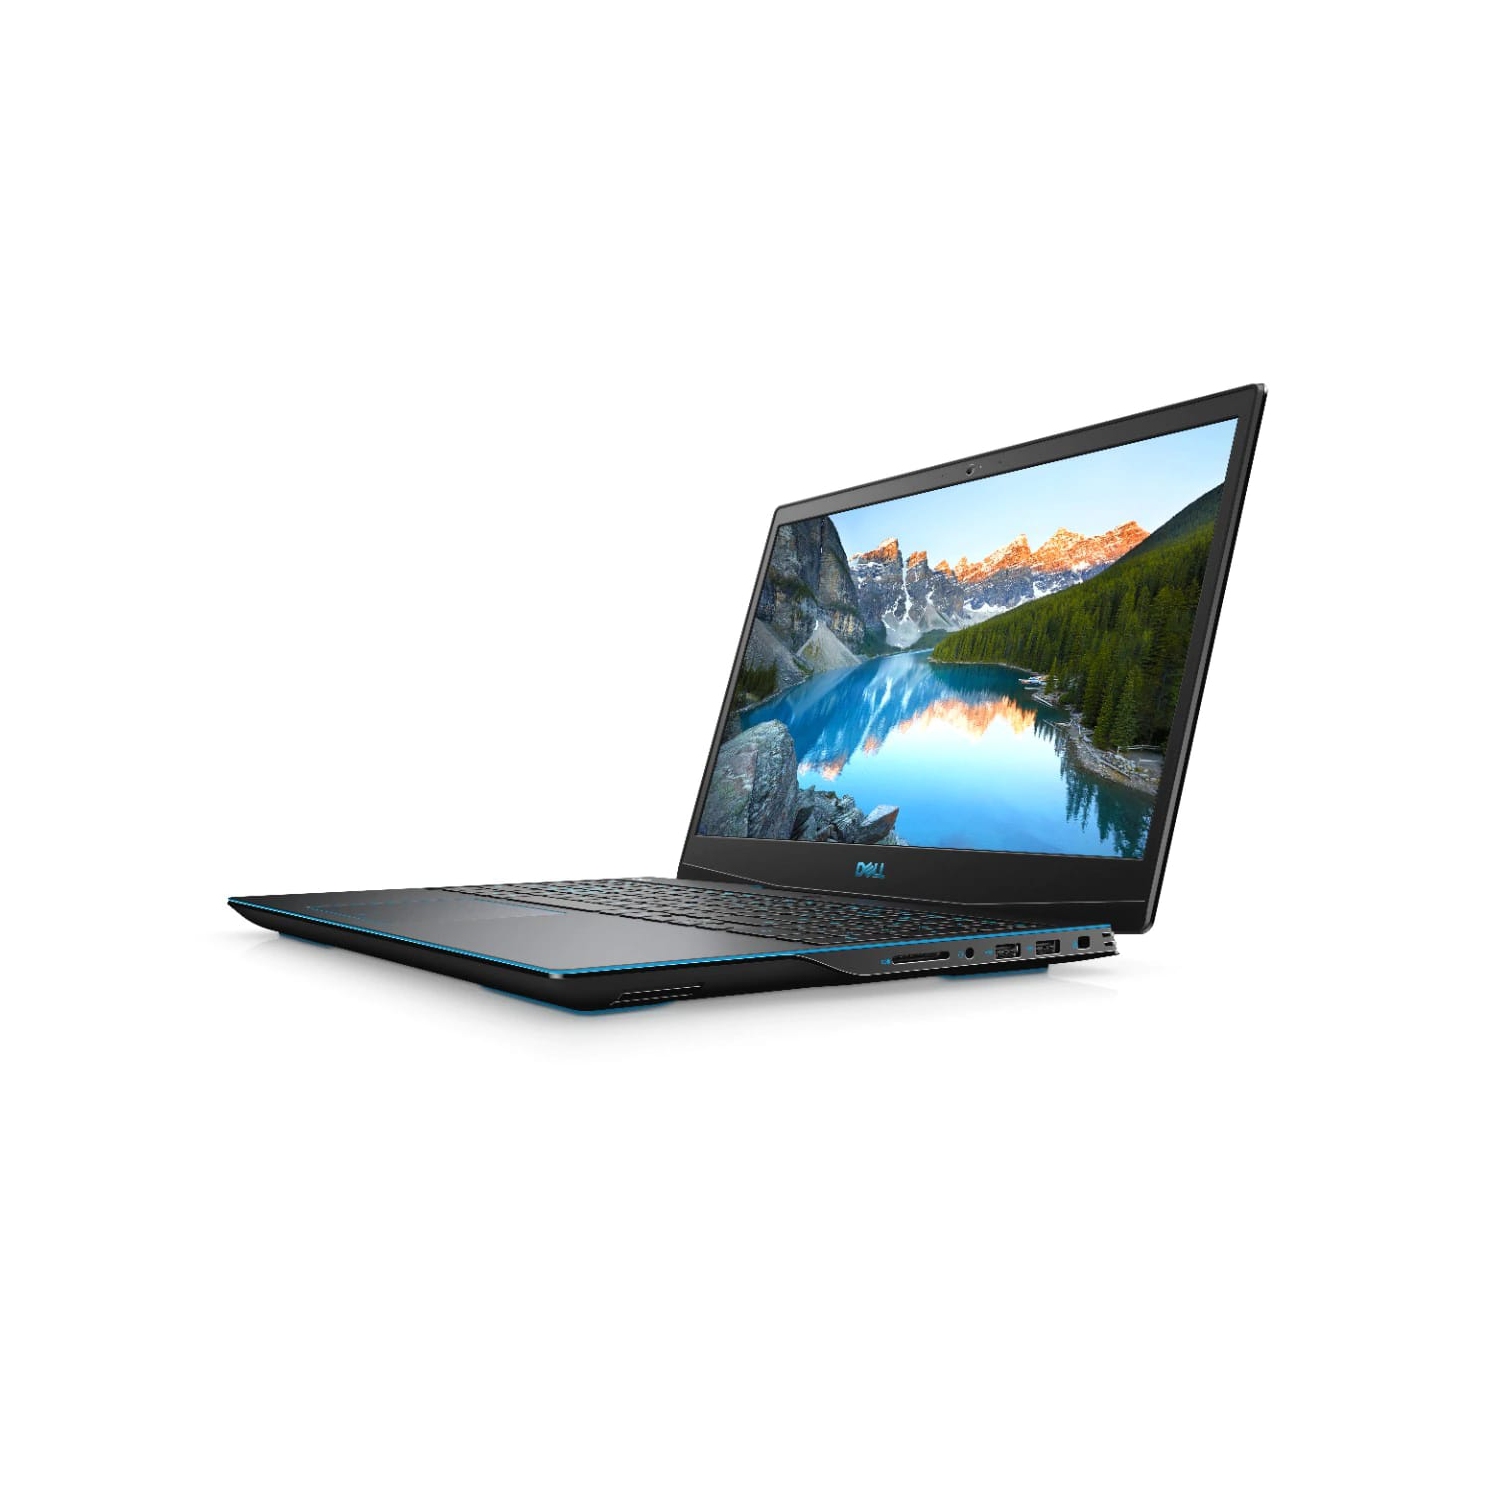 Refurbished (Excellent) – Dell G3 3500 Gaming Laptop (2020) | 15.6" FHD | Core i5 - 512GB SSD + 1TB HDD - 8GB RAM - 1650 Ti | 4 Cores @ 4.5 GHz - 10th Gen CPU